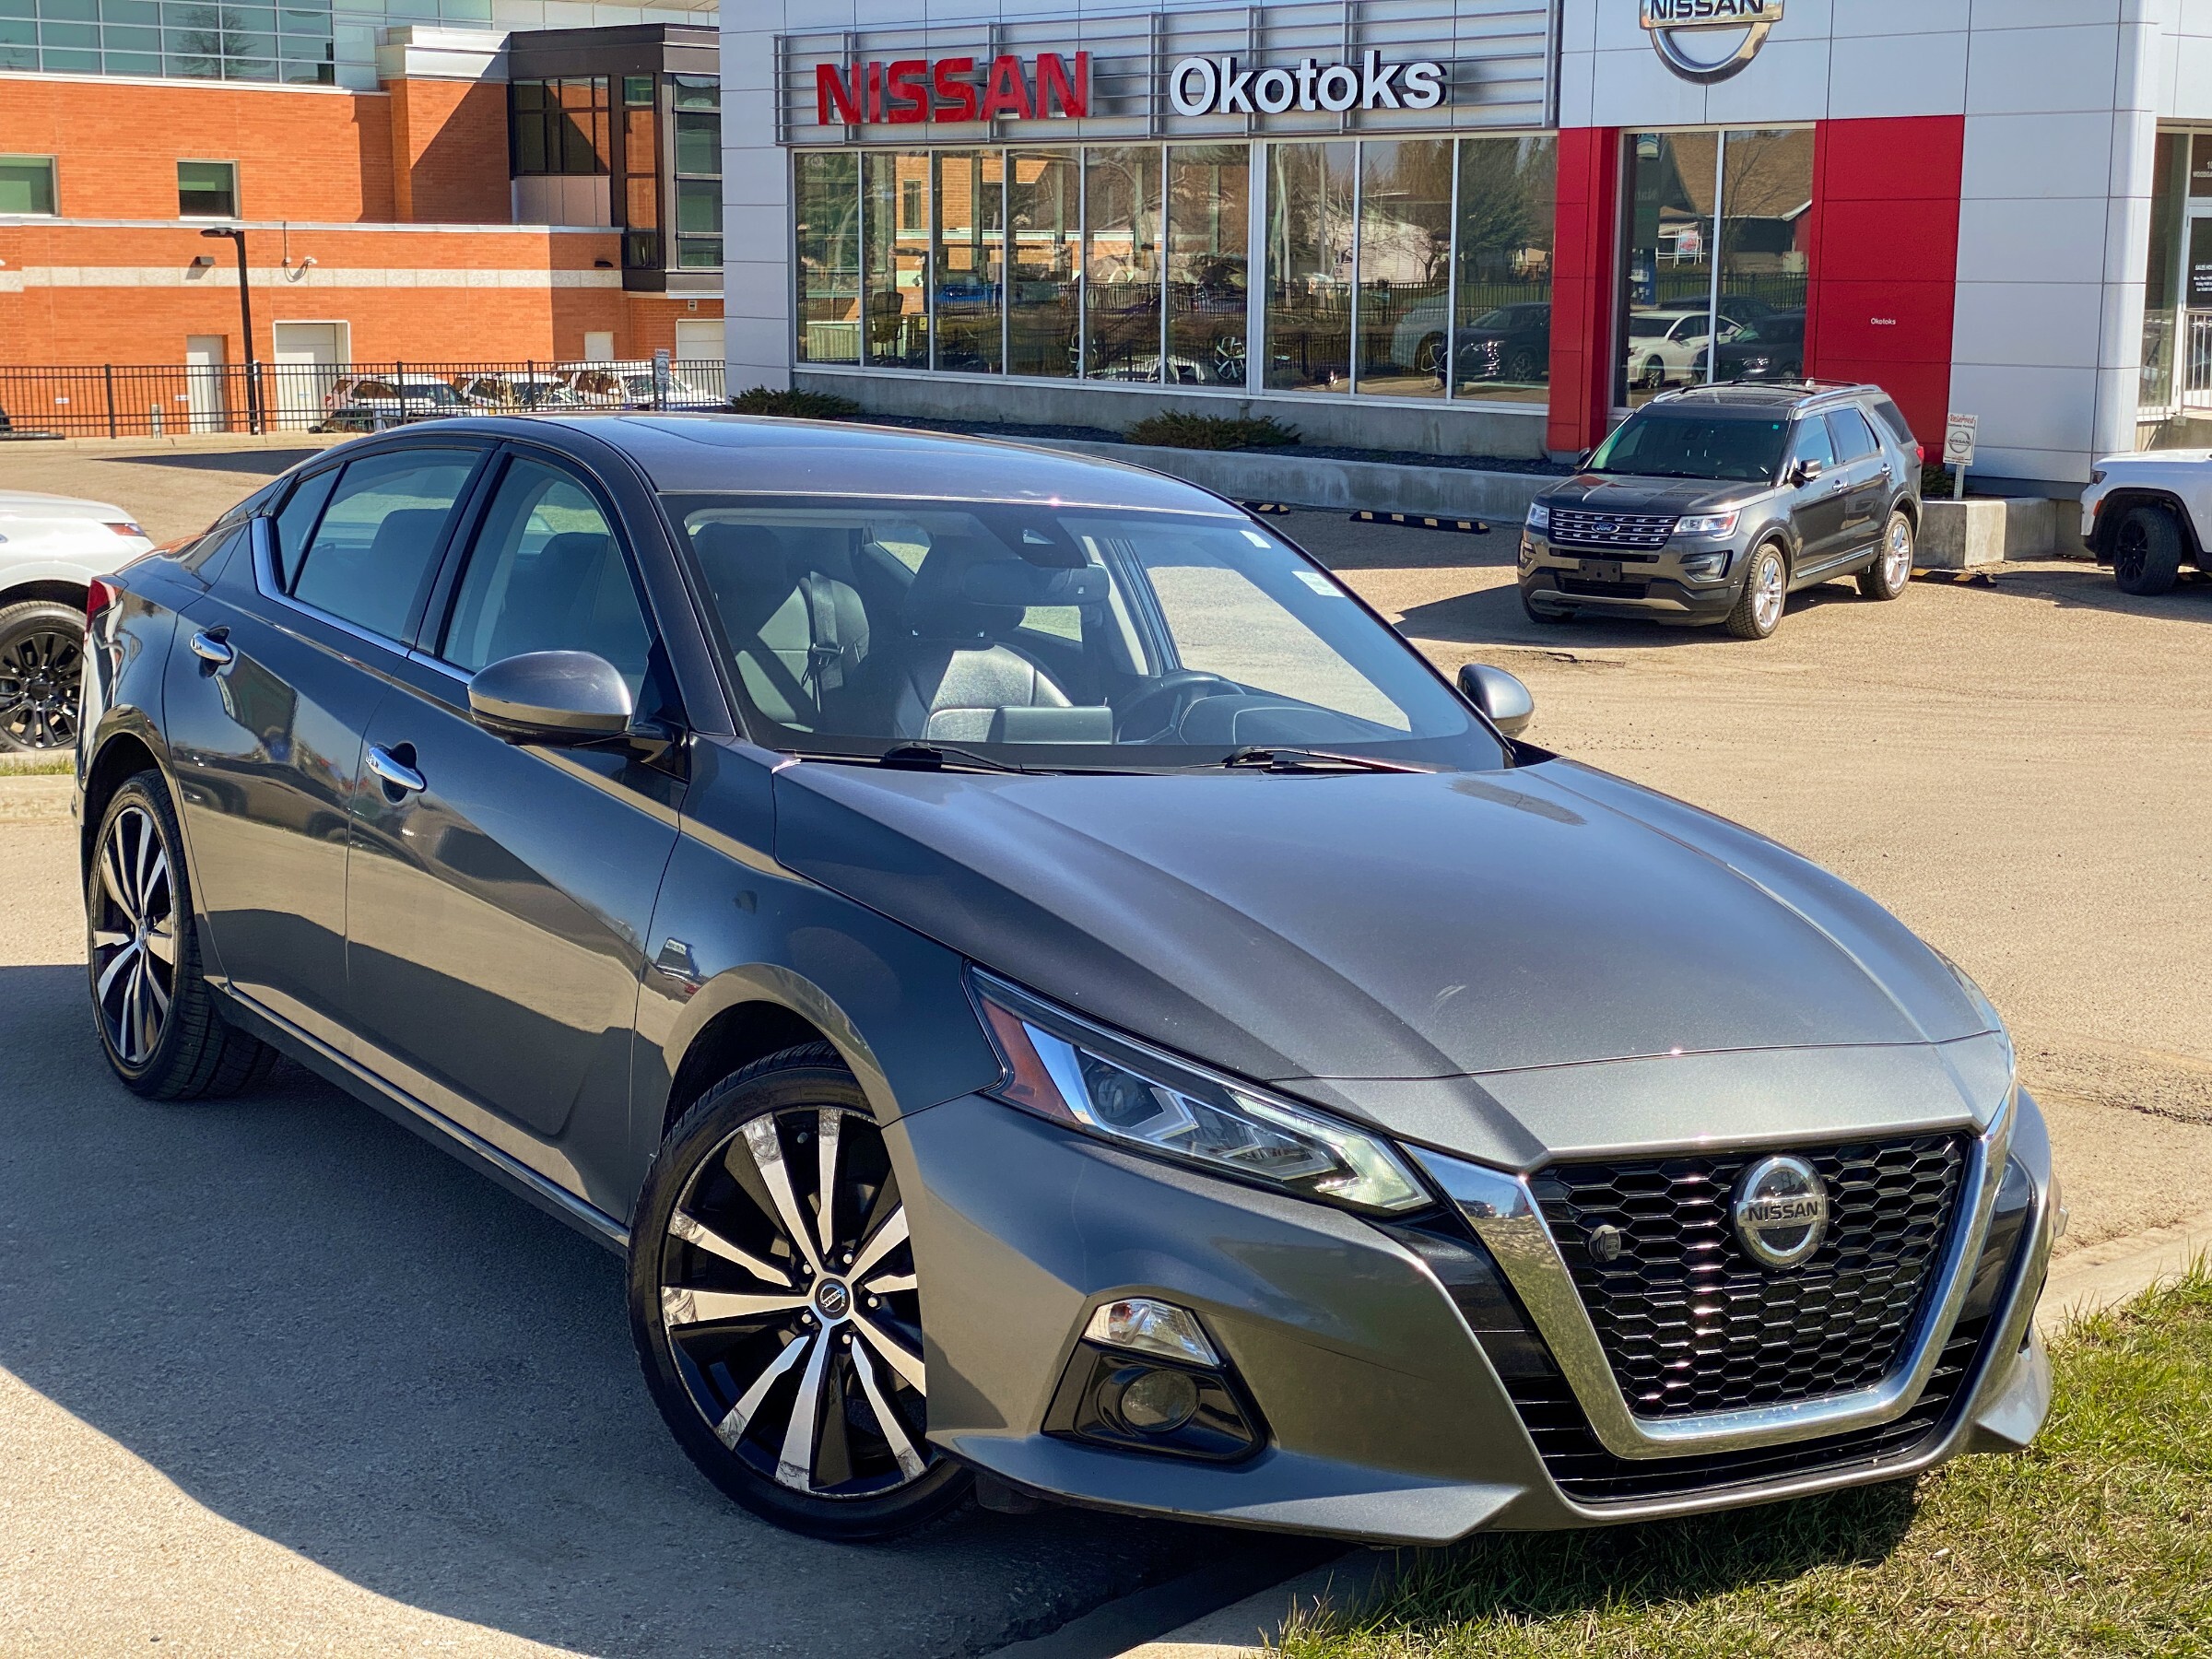 2019 Nissan Altima AWD, Just arrived, one owner